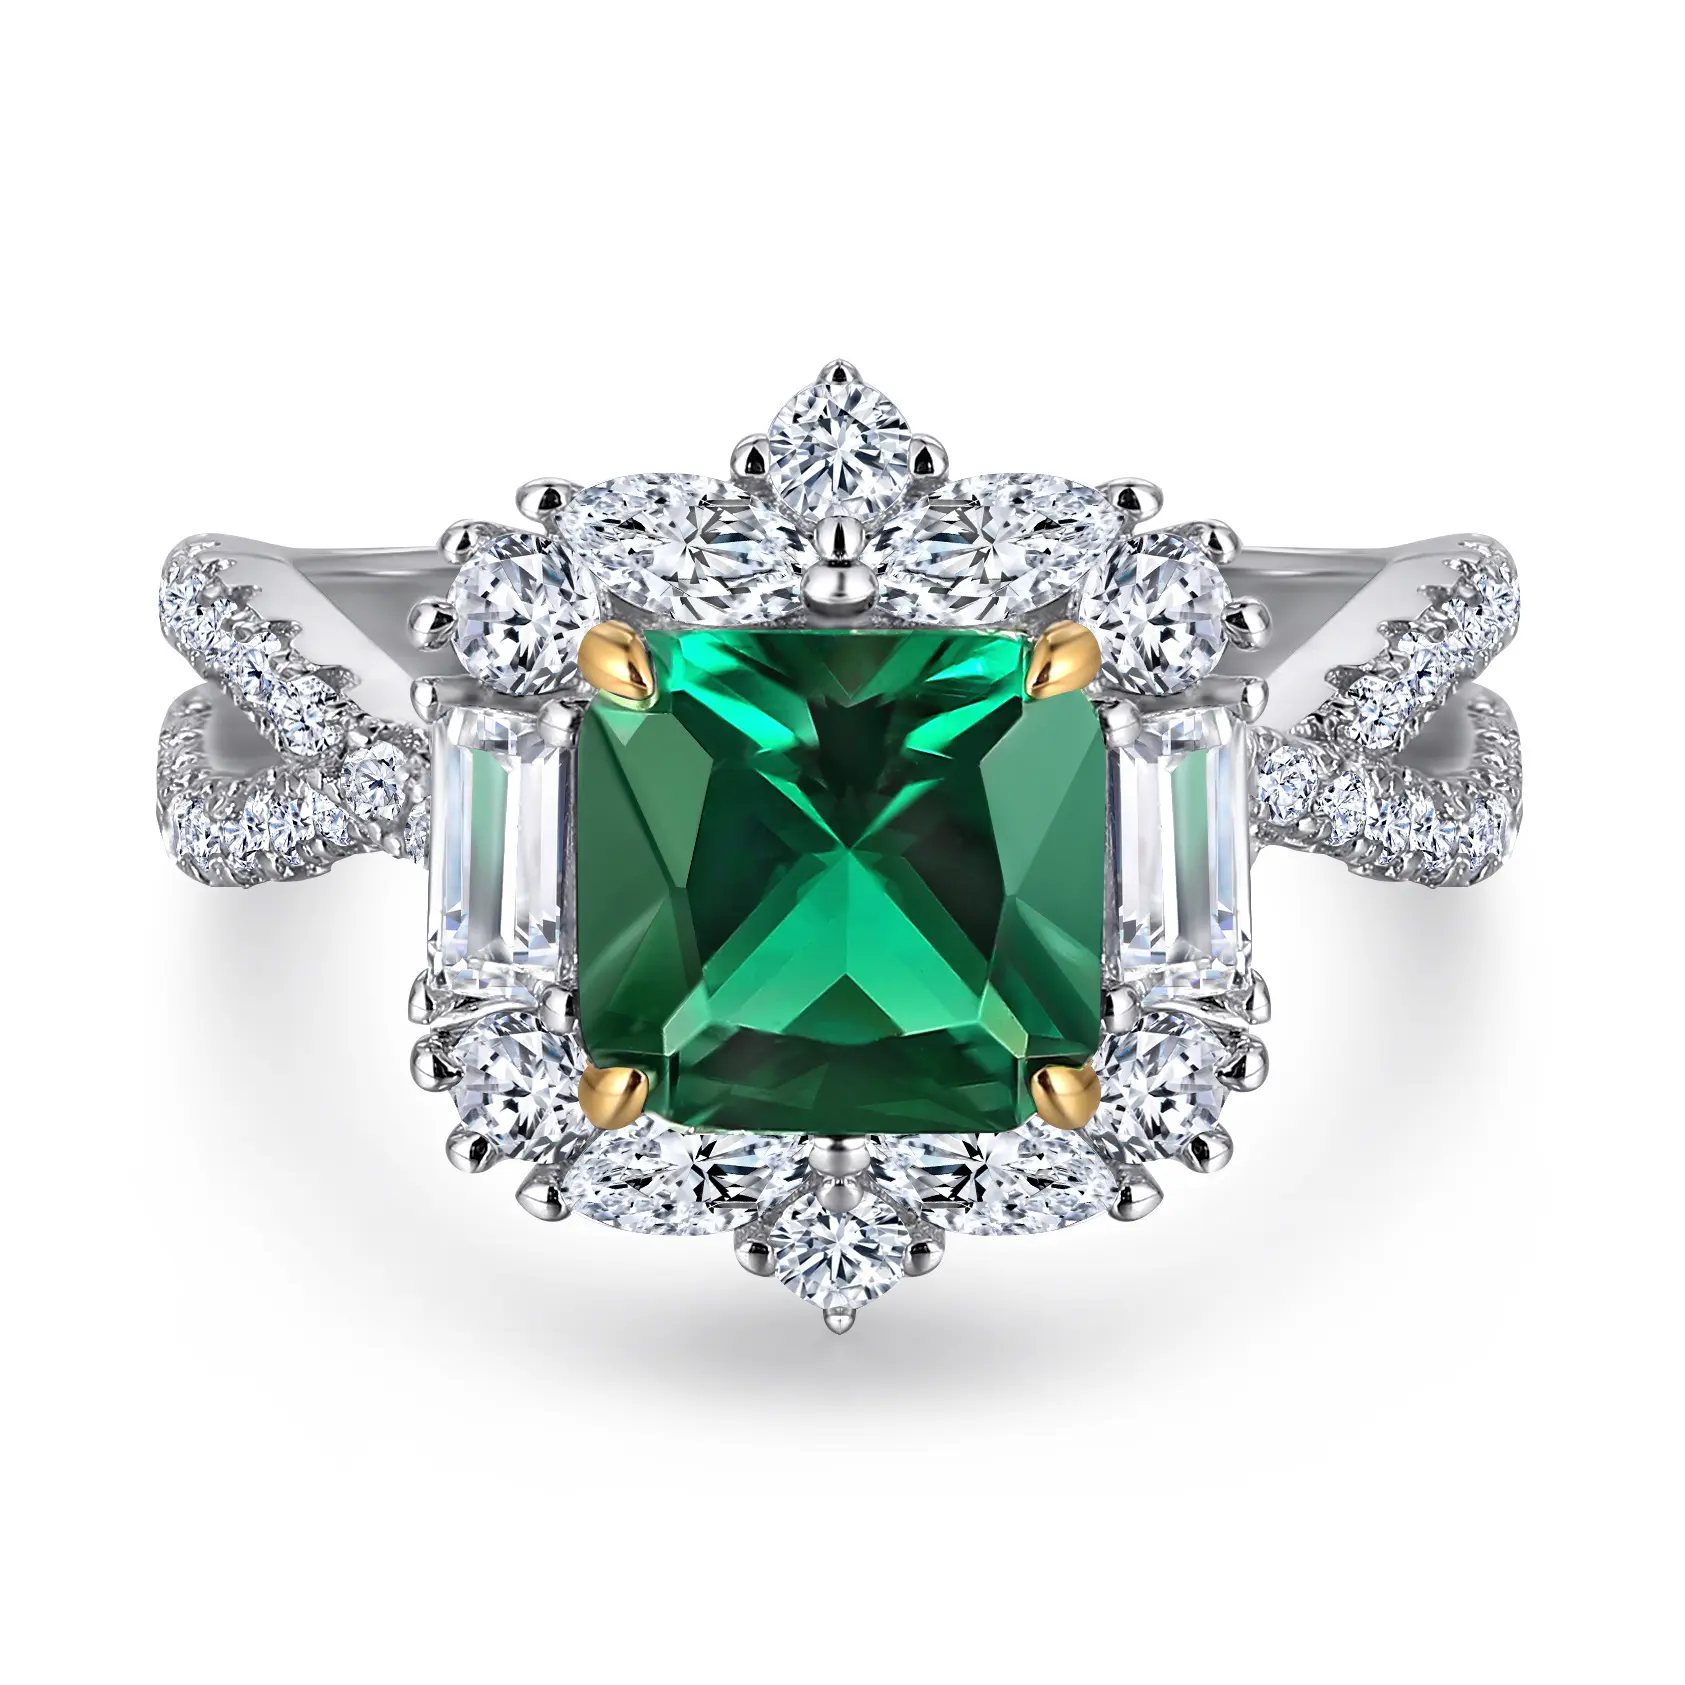 S925 Sterling Silver Inlaid Emerald Square Lab Grown Artificial High Carbon Diamond Wedding Rings Jewellery Ring